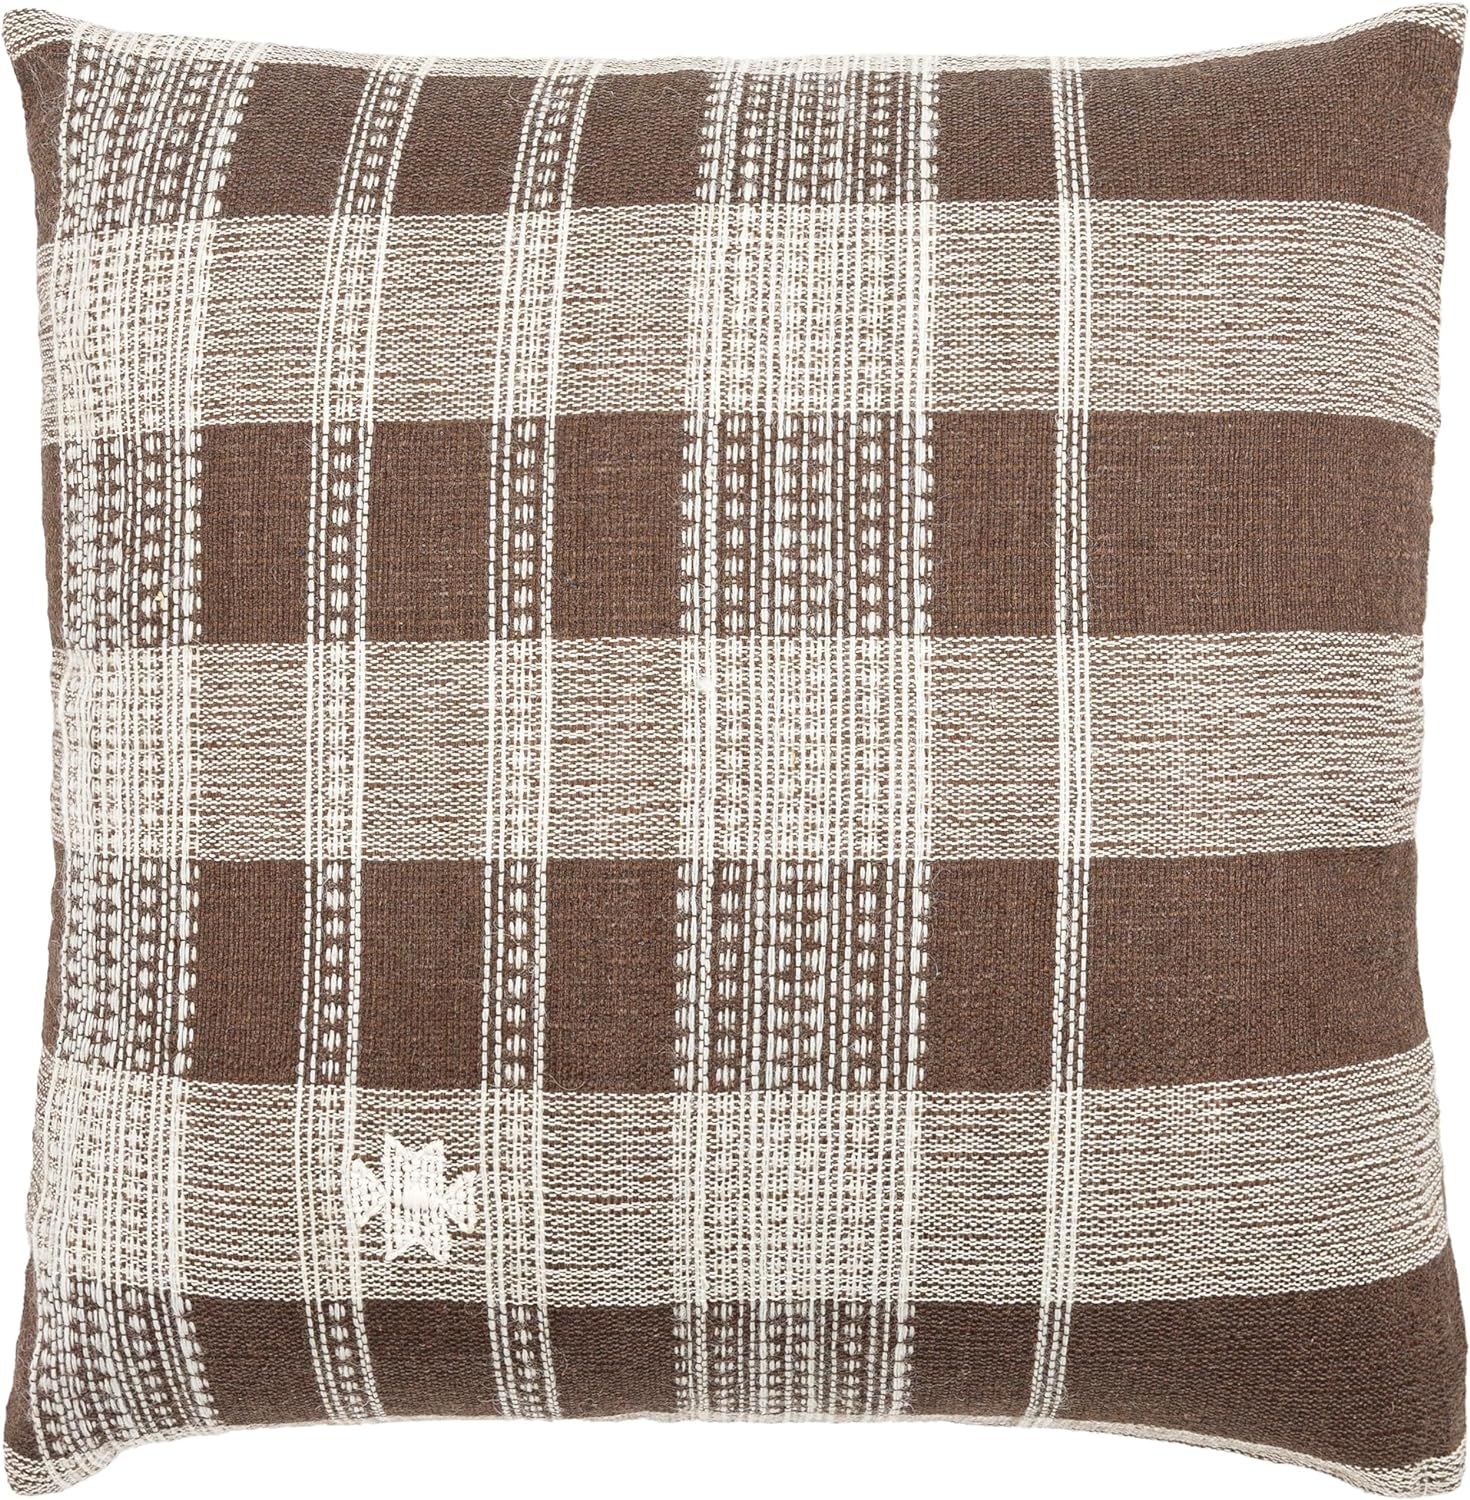 Surya x Becki Owens Modern Myrna Accent Pillow Cover only, 18" L x 18" W, Brown | Amazon (US)